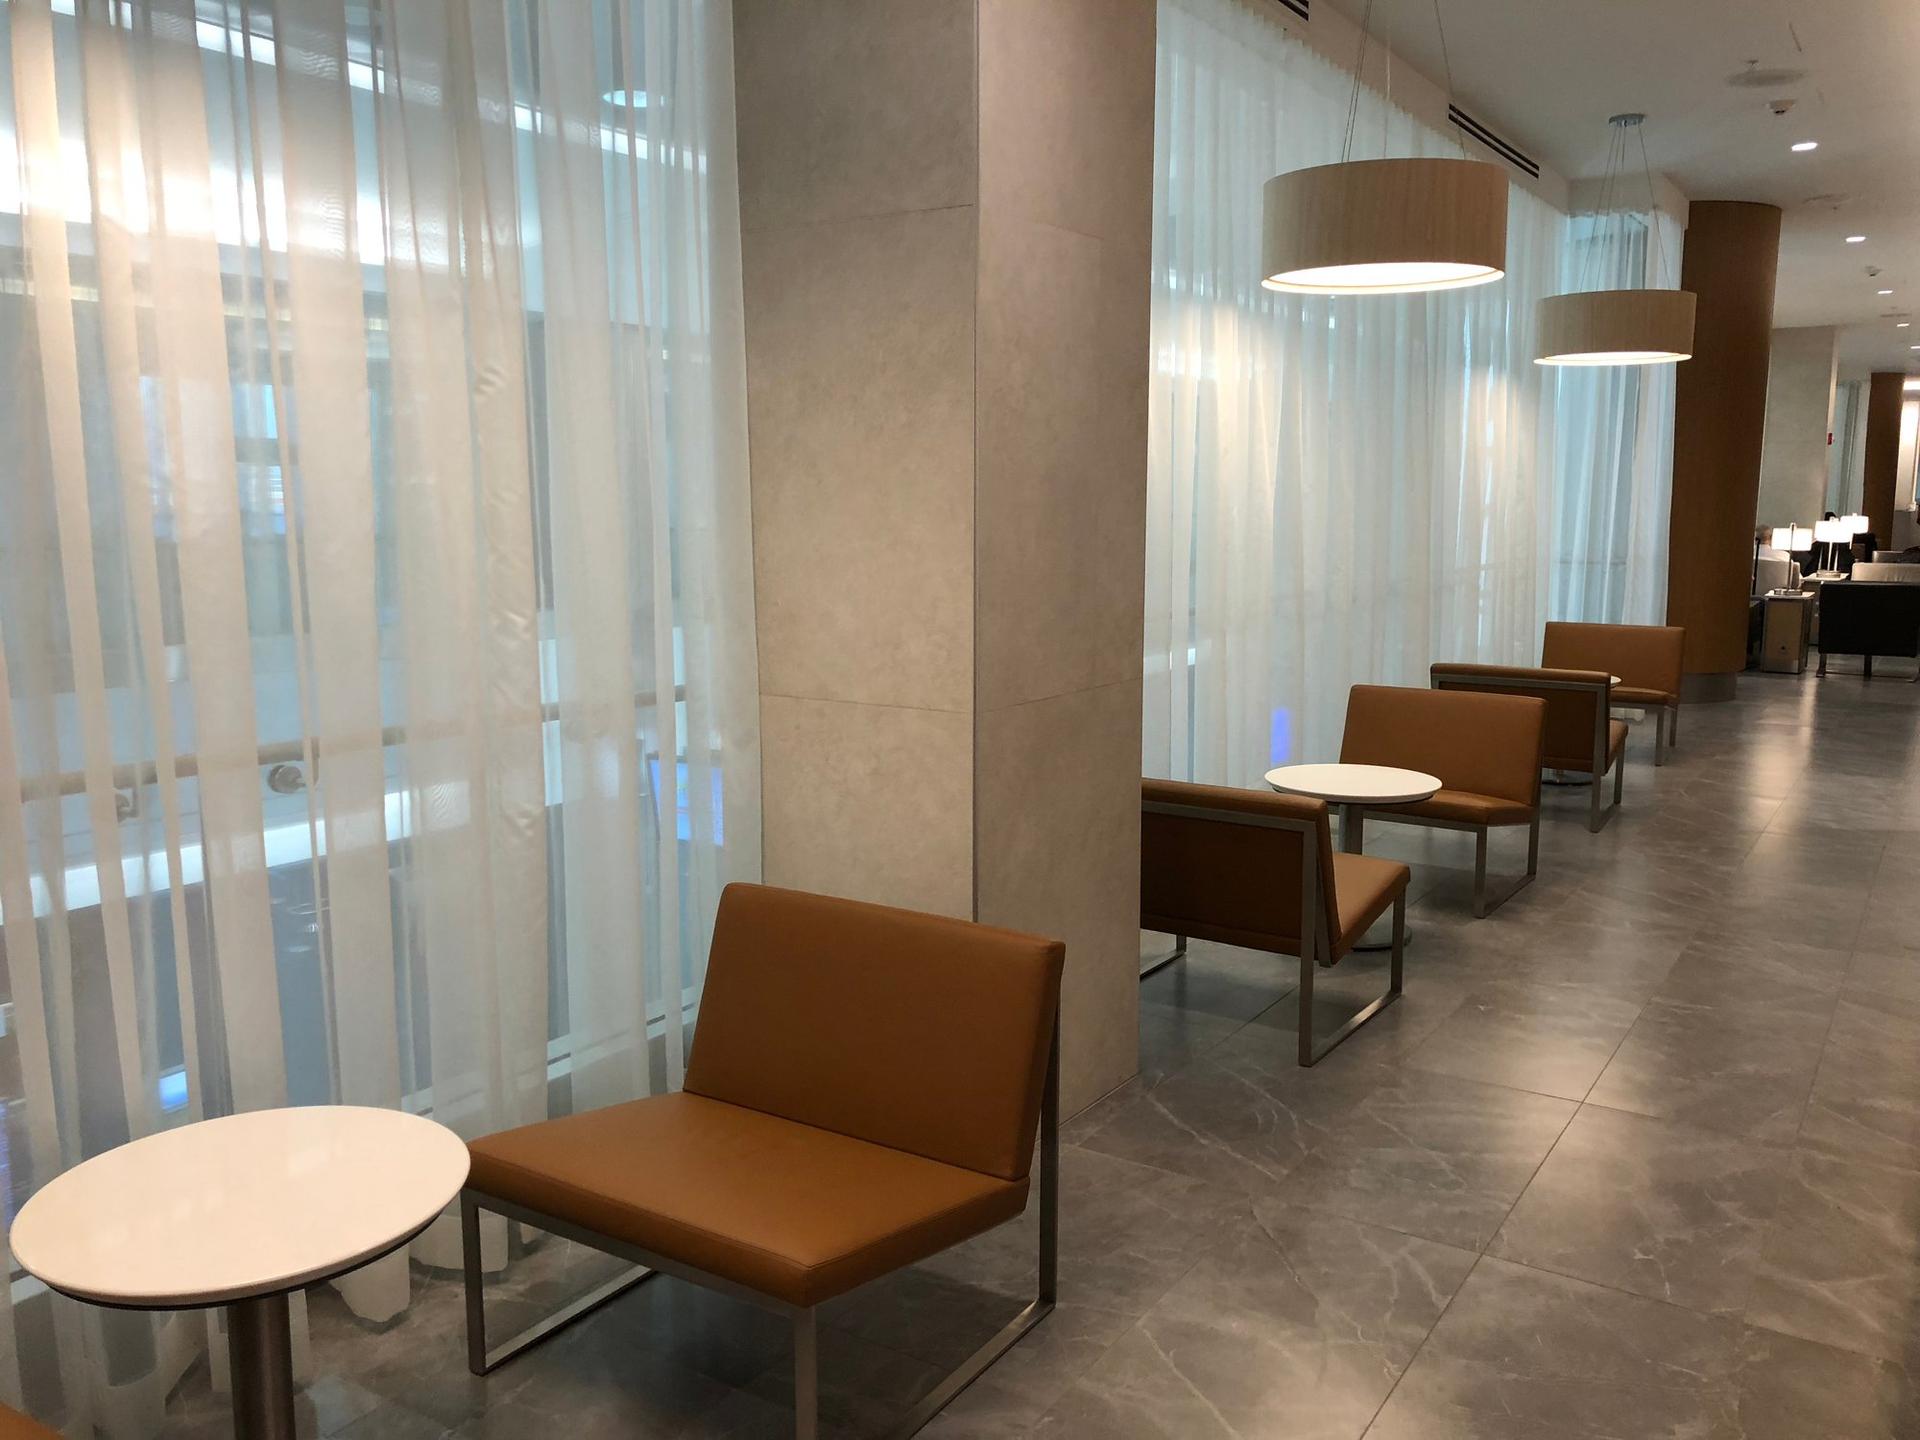 American Airlines Flagship Lounge image 9 of 65